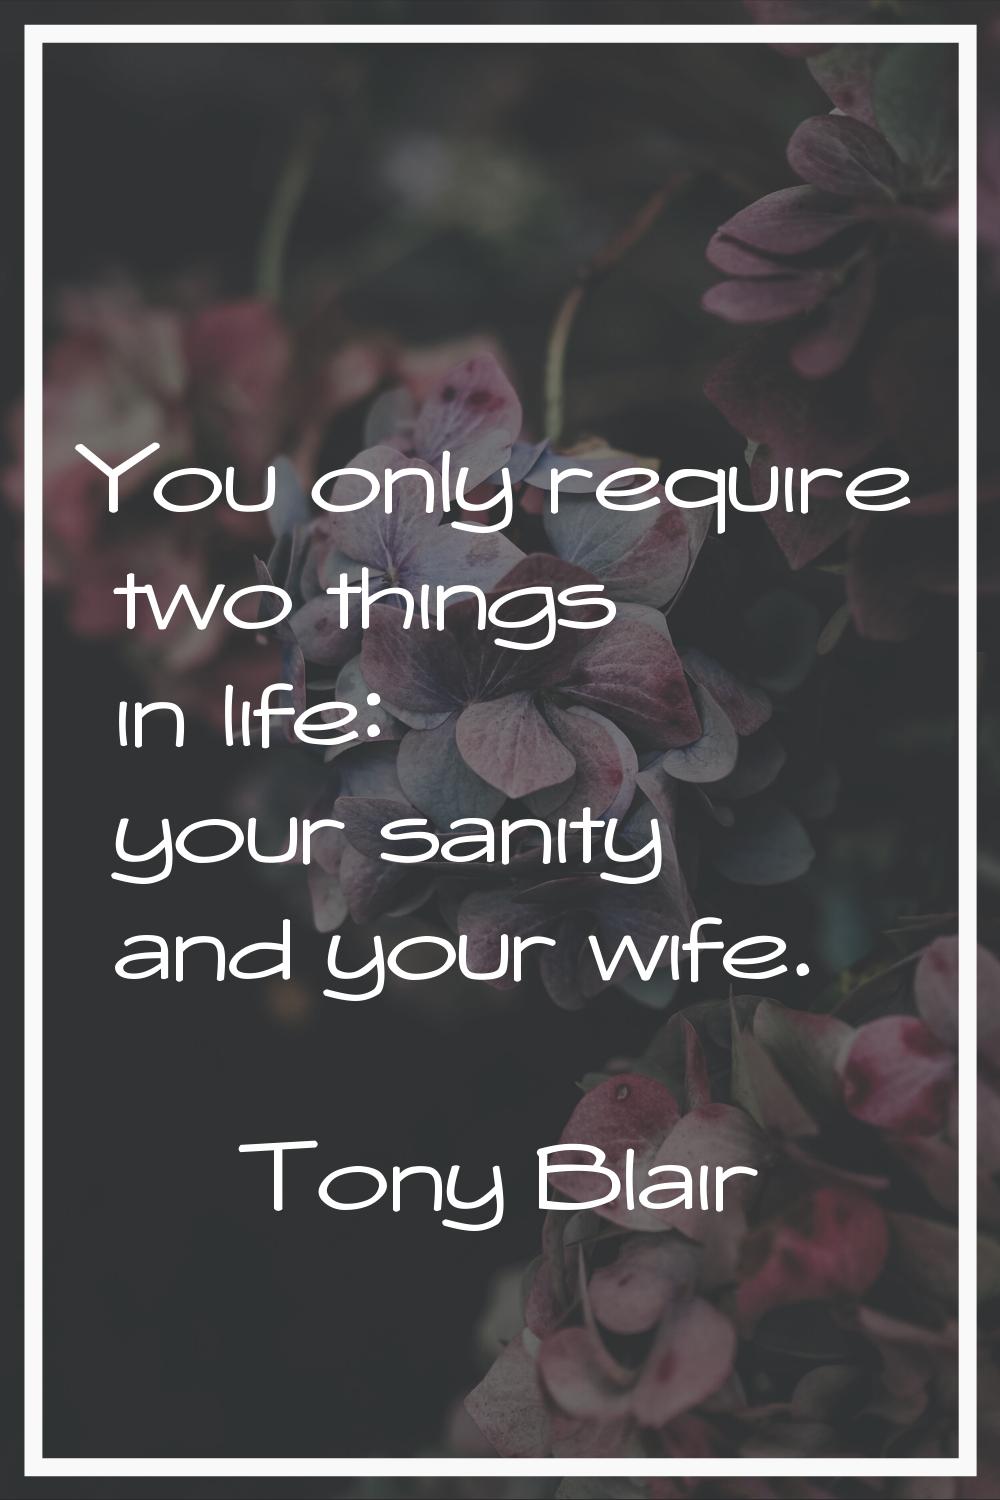 You only require two things in life: your sanity and your wife.